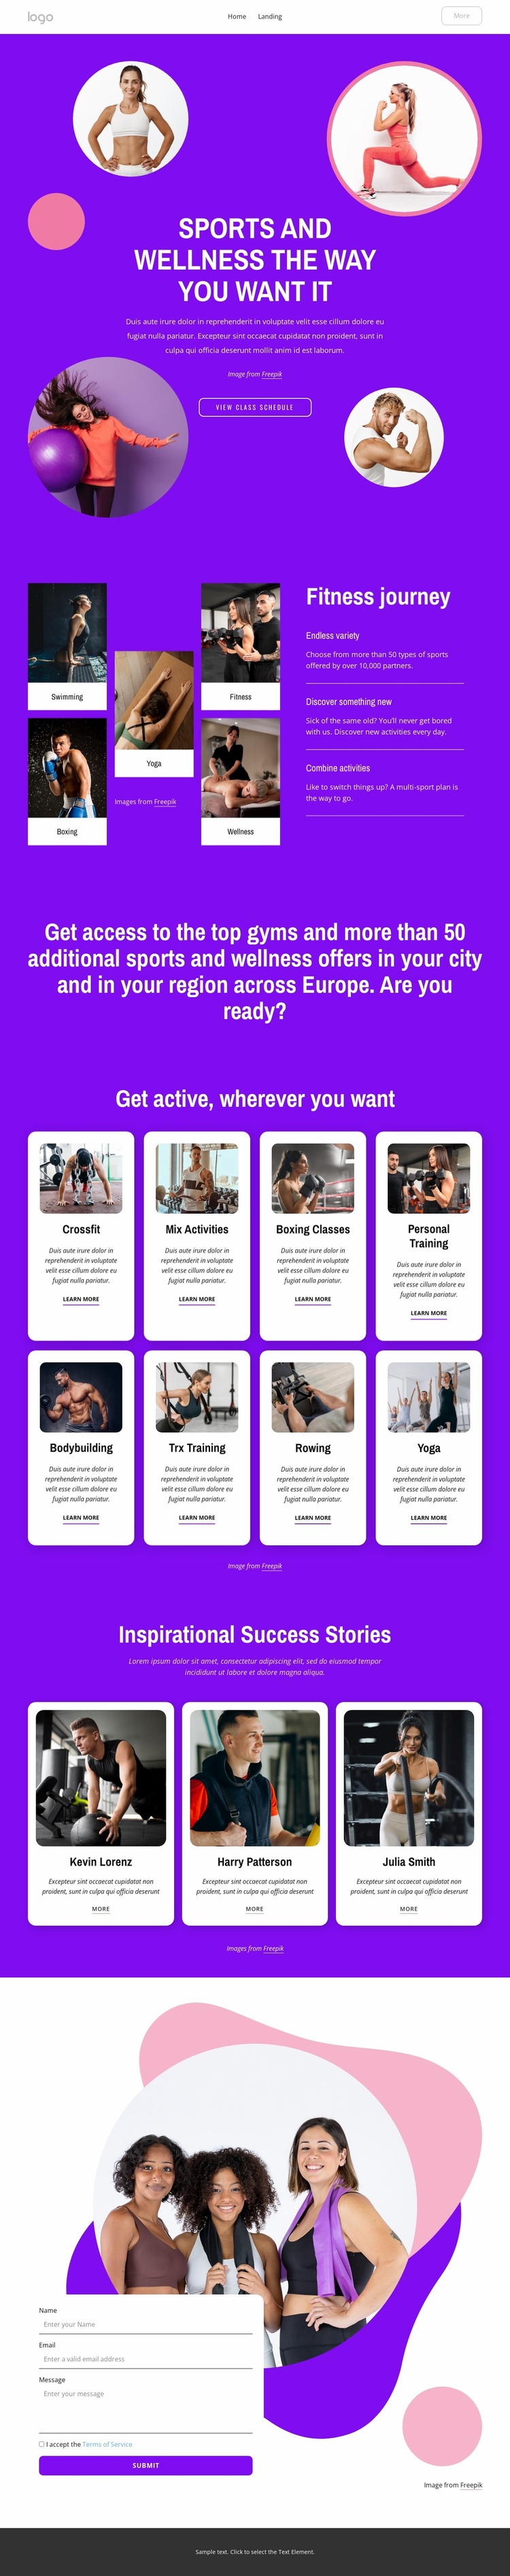 Sports and wellness the way you want it Landing Page